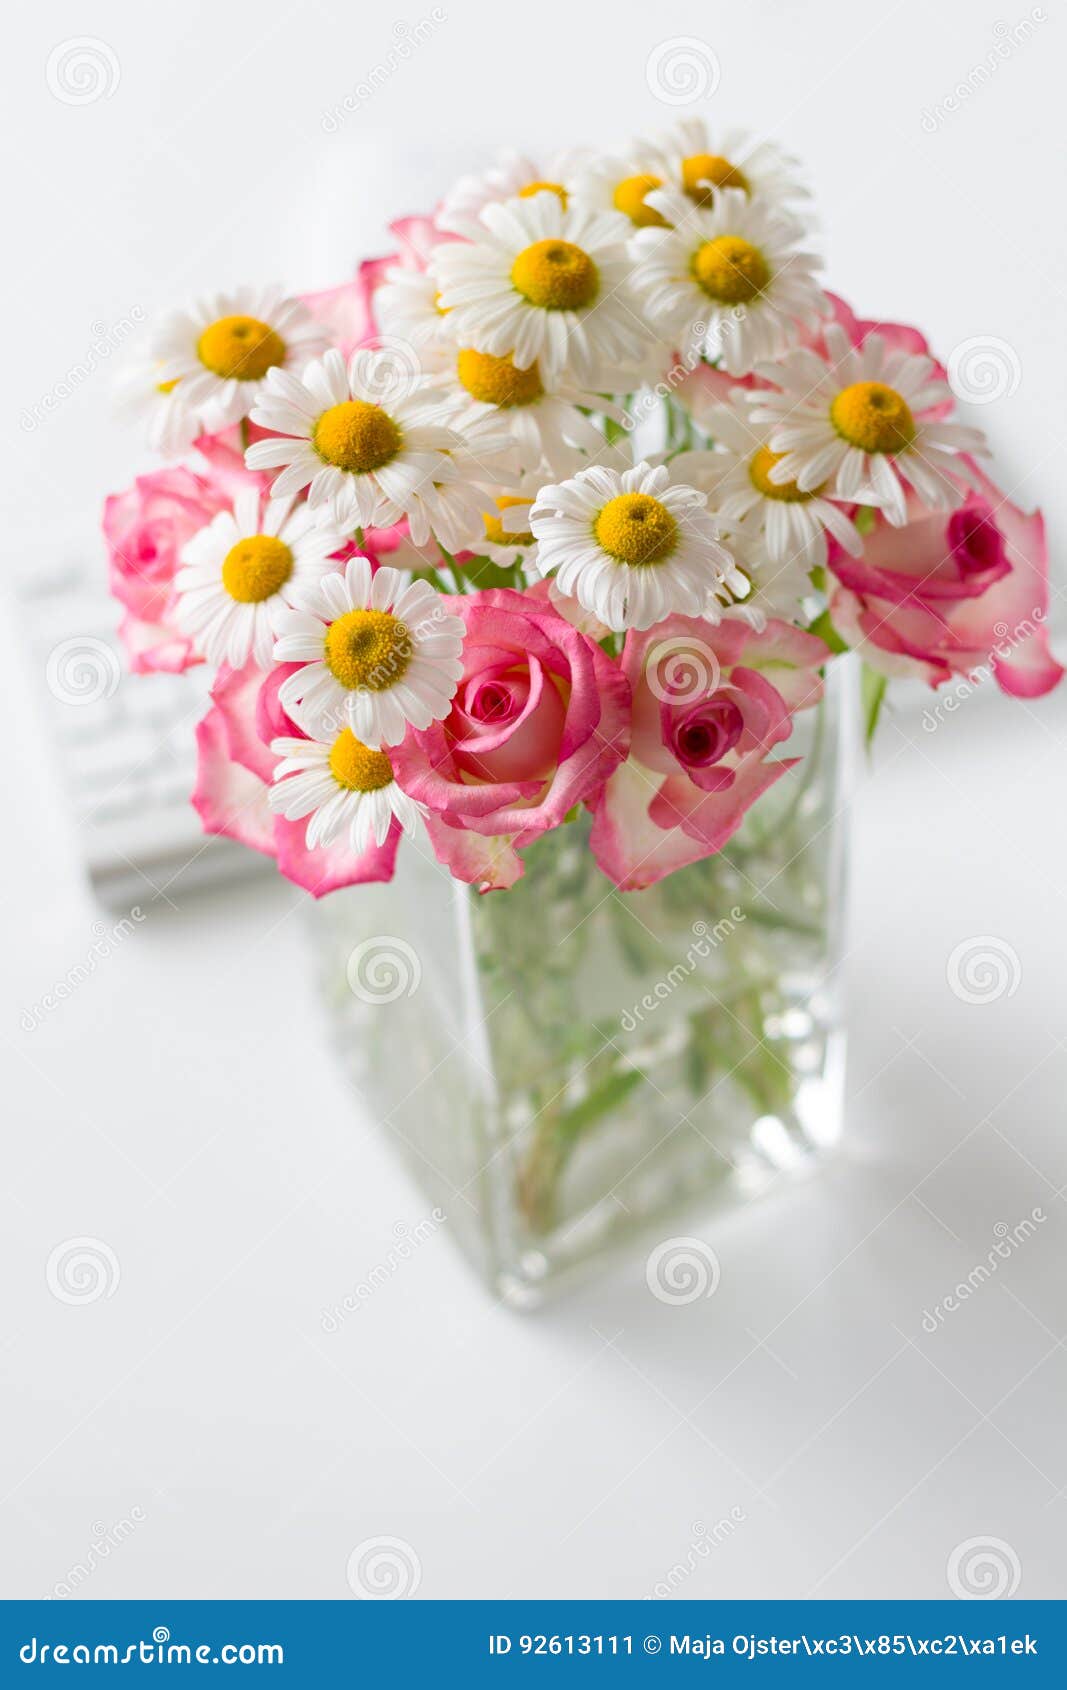 Woman Office Desk With Blossom Flowers Stock Image Image Of